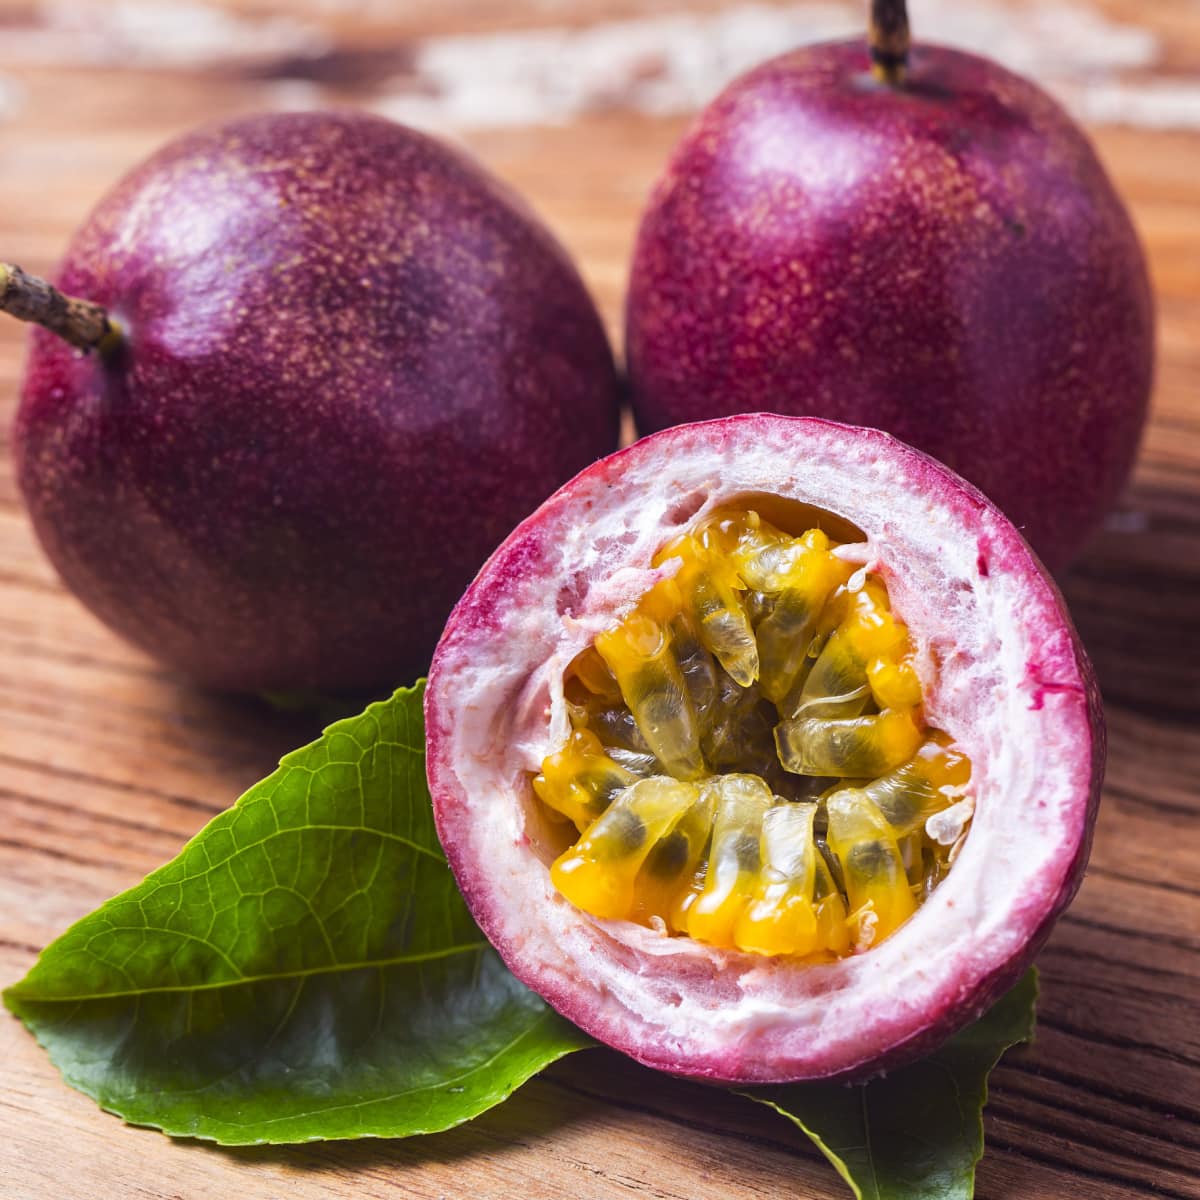 Whole and Sliced into Half Ripe Passion Fruit on a Wooden Table